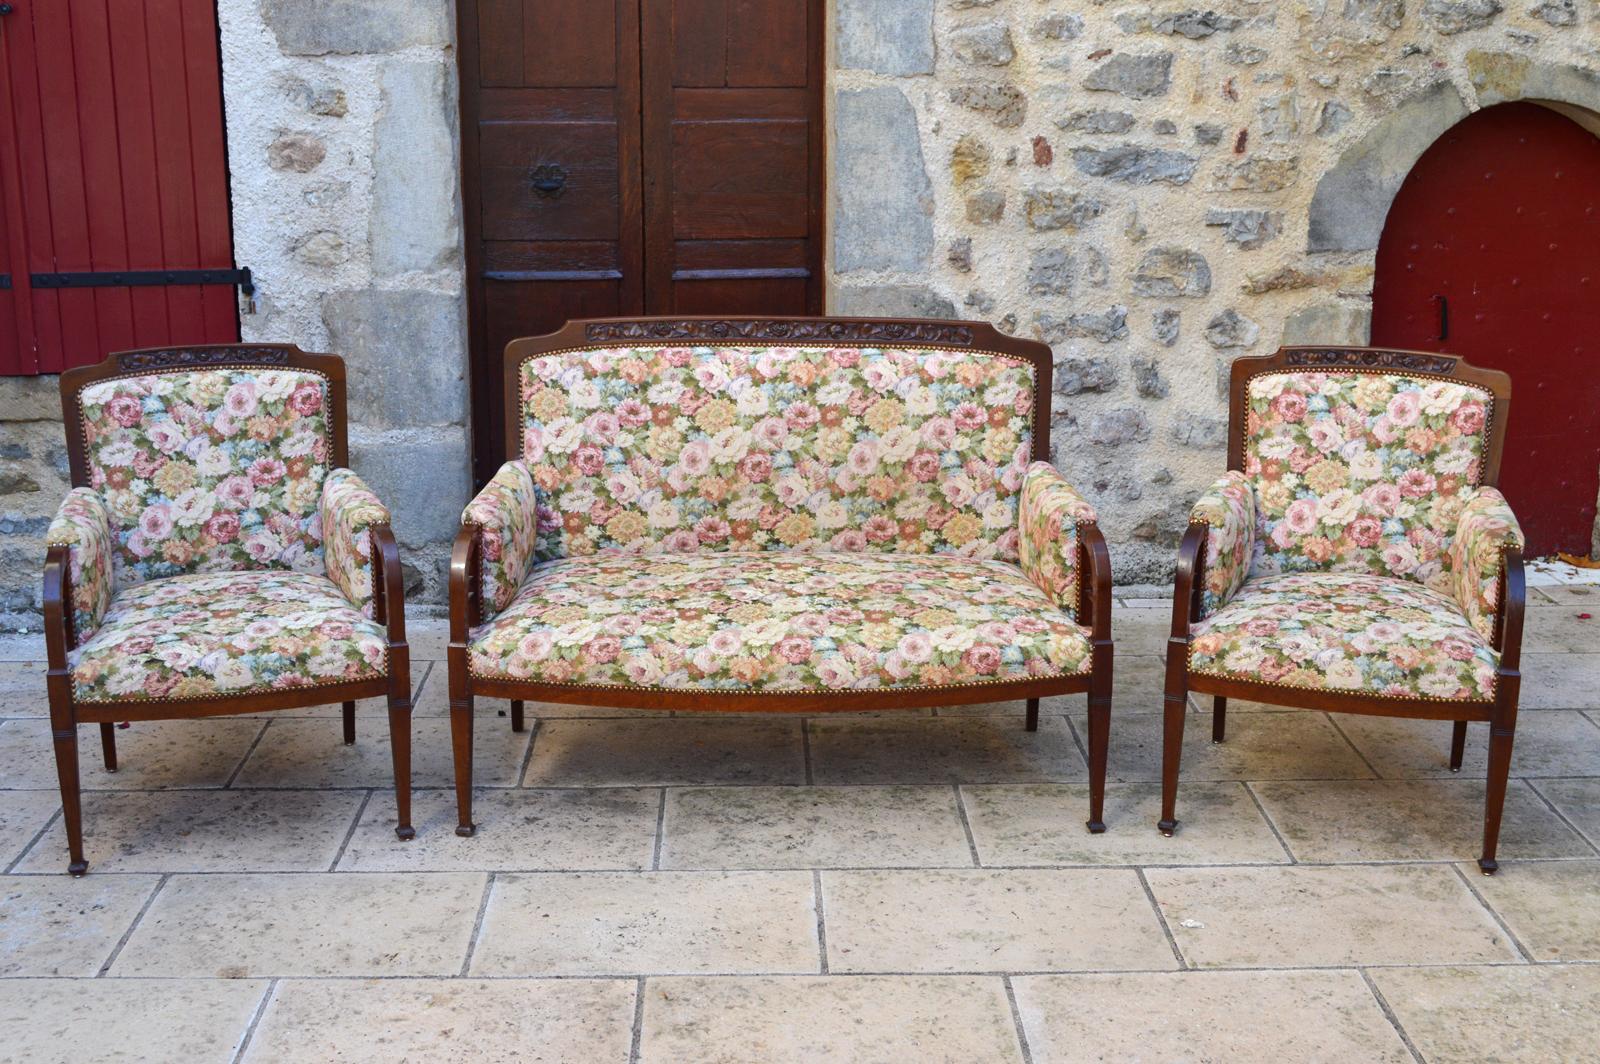 Wonderful salon set of 7 pieces in solid carved mahogany on a floral theme (roses):
-1 sofa
-2 armchairs
-4 chairs

Good general second-hand condition, requires a change of tissues and some small restorations of use.

Measures: Sofa: Height